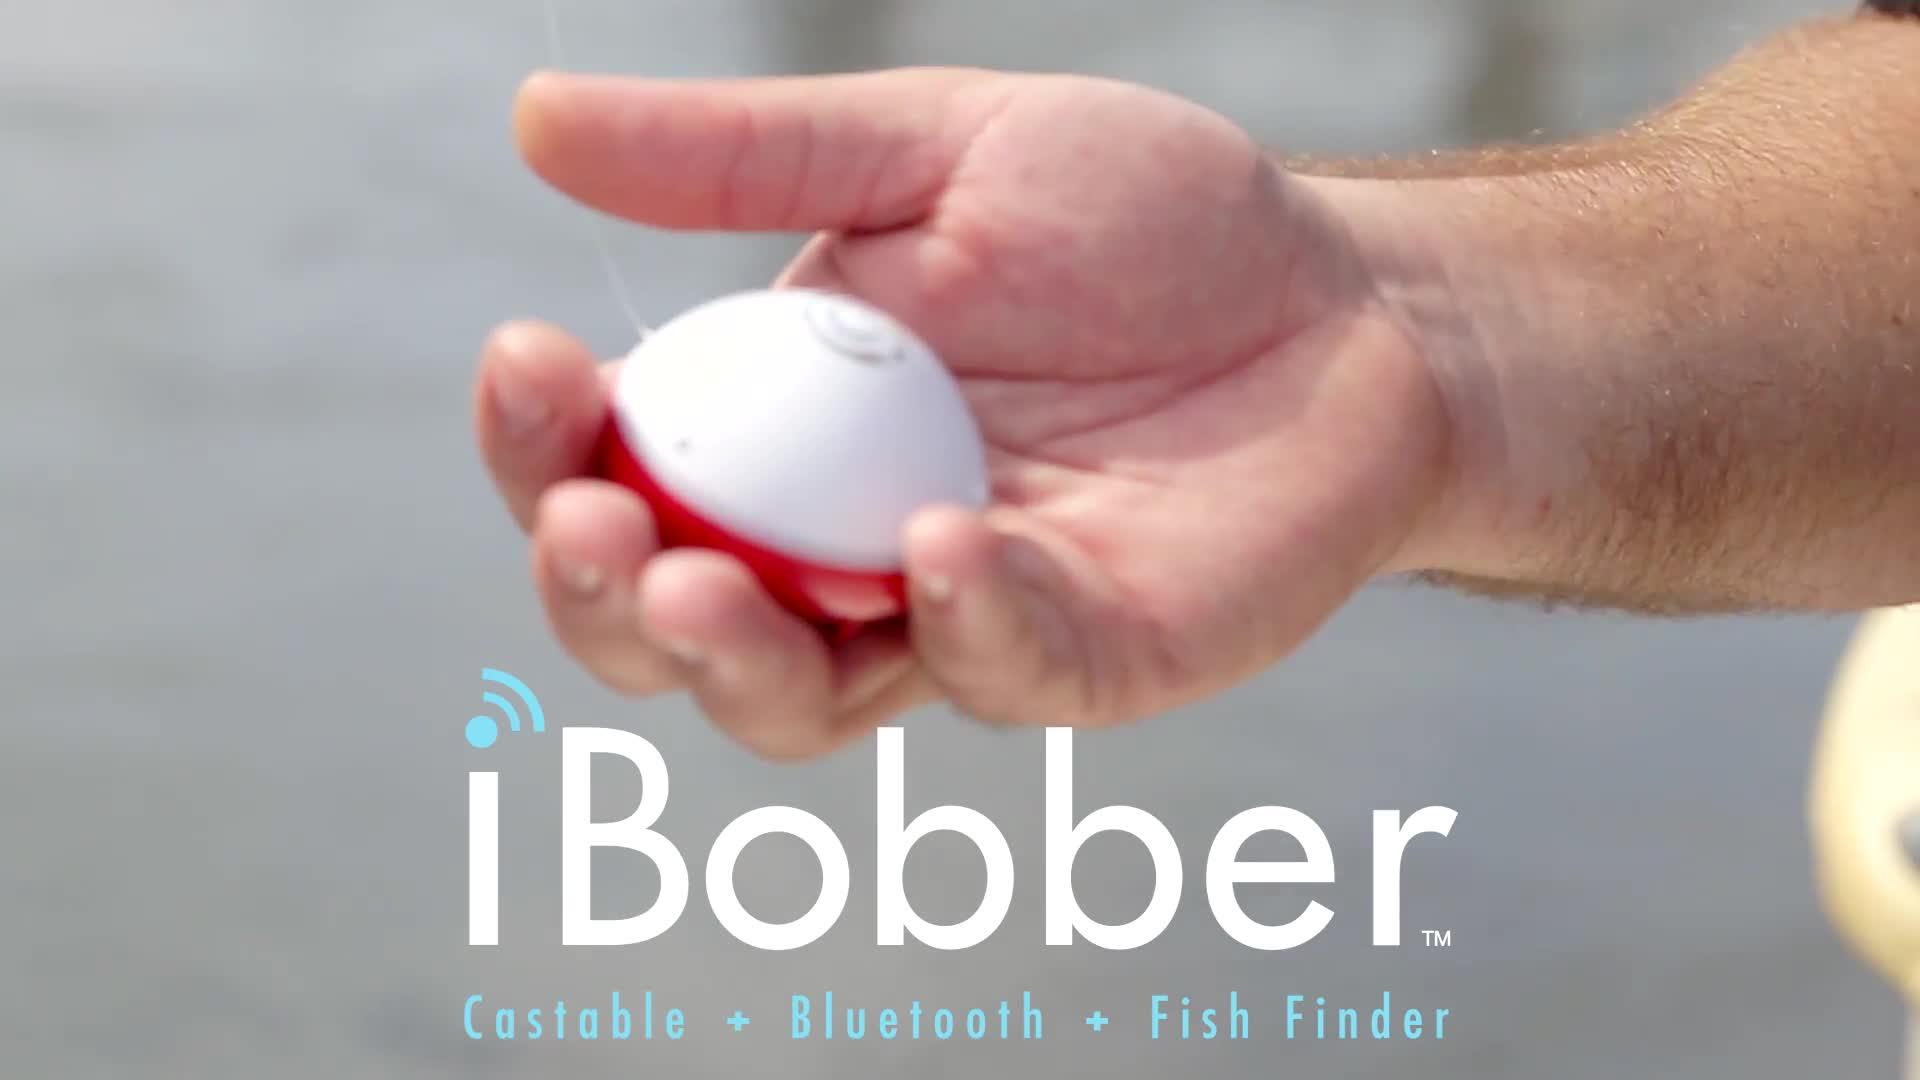 iBobber Castable Bluetooth Smart Fish Finder - Carp and Night